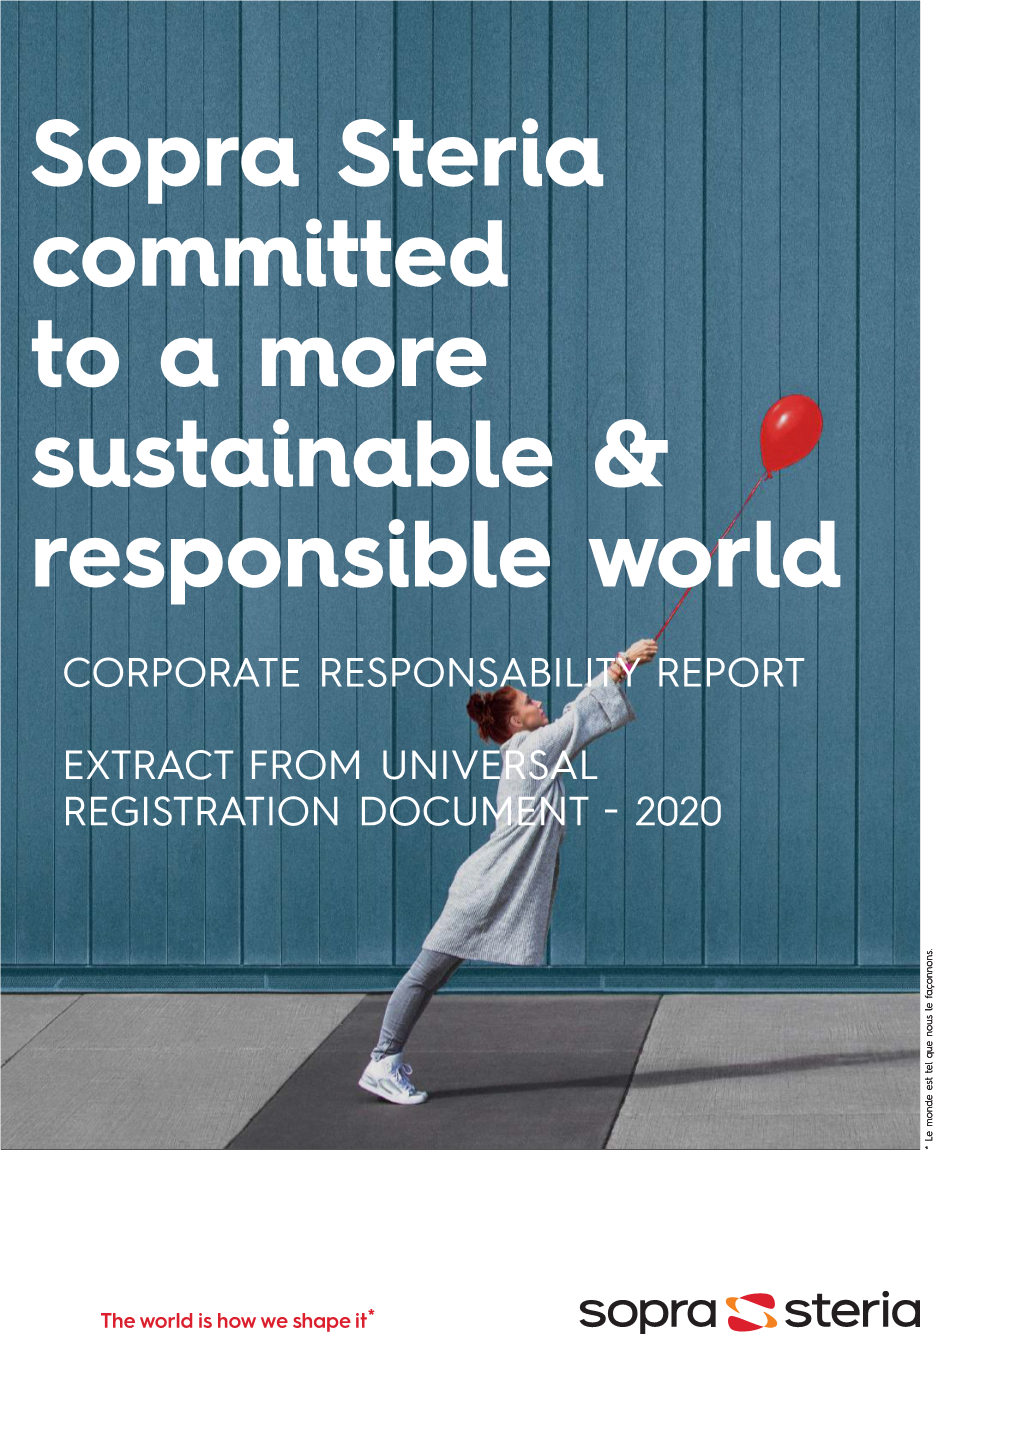 Sopra Steria Committed to a More Sustainable & Responsible World